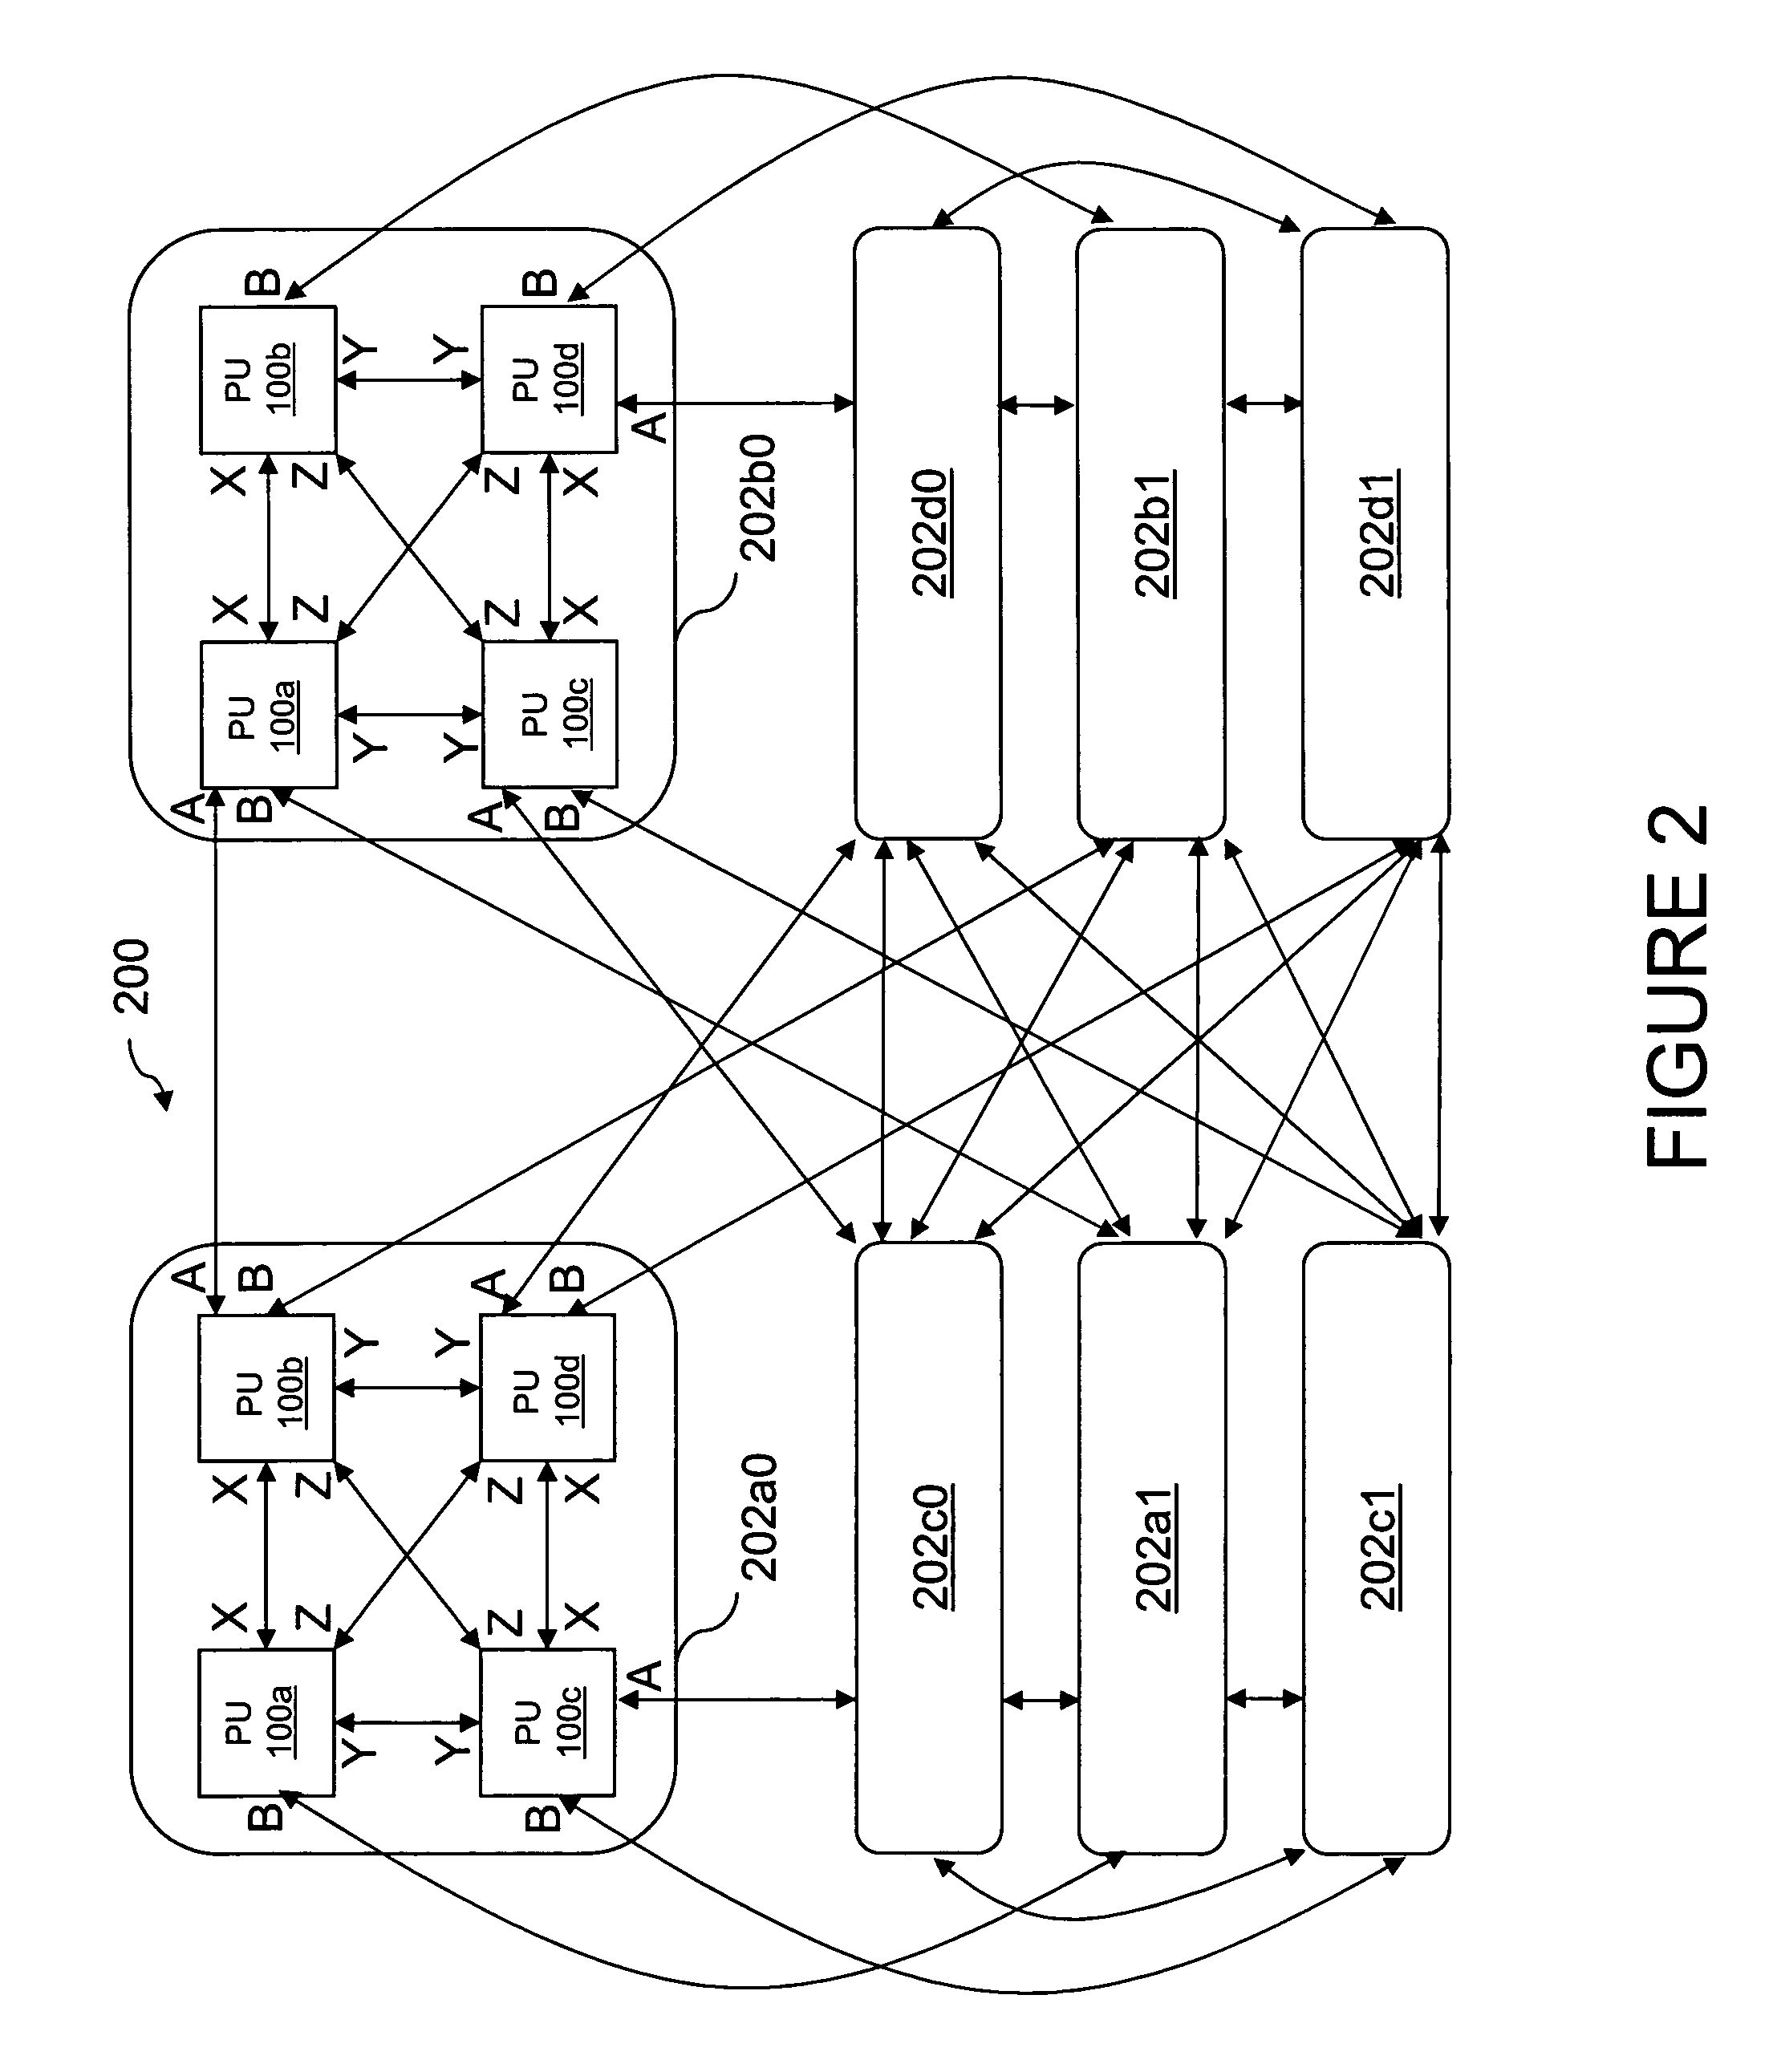 Data processing system, method and interconnect fabric supporting destination data tagging